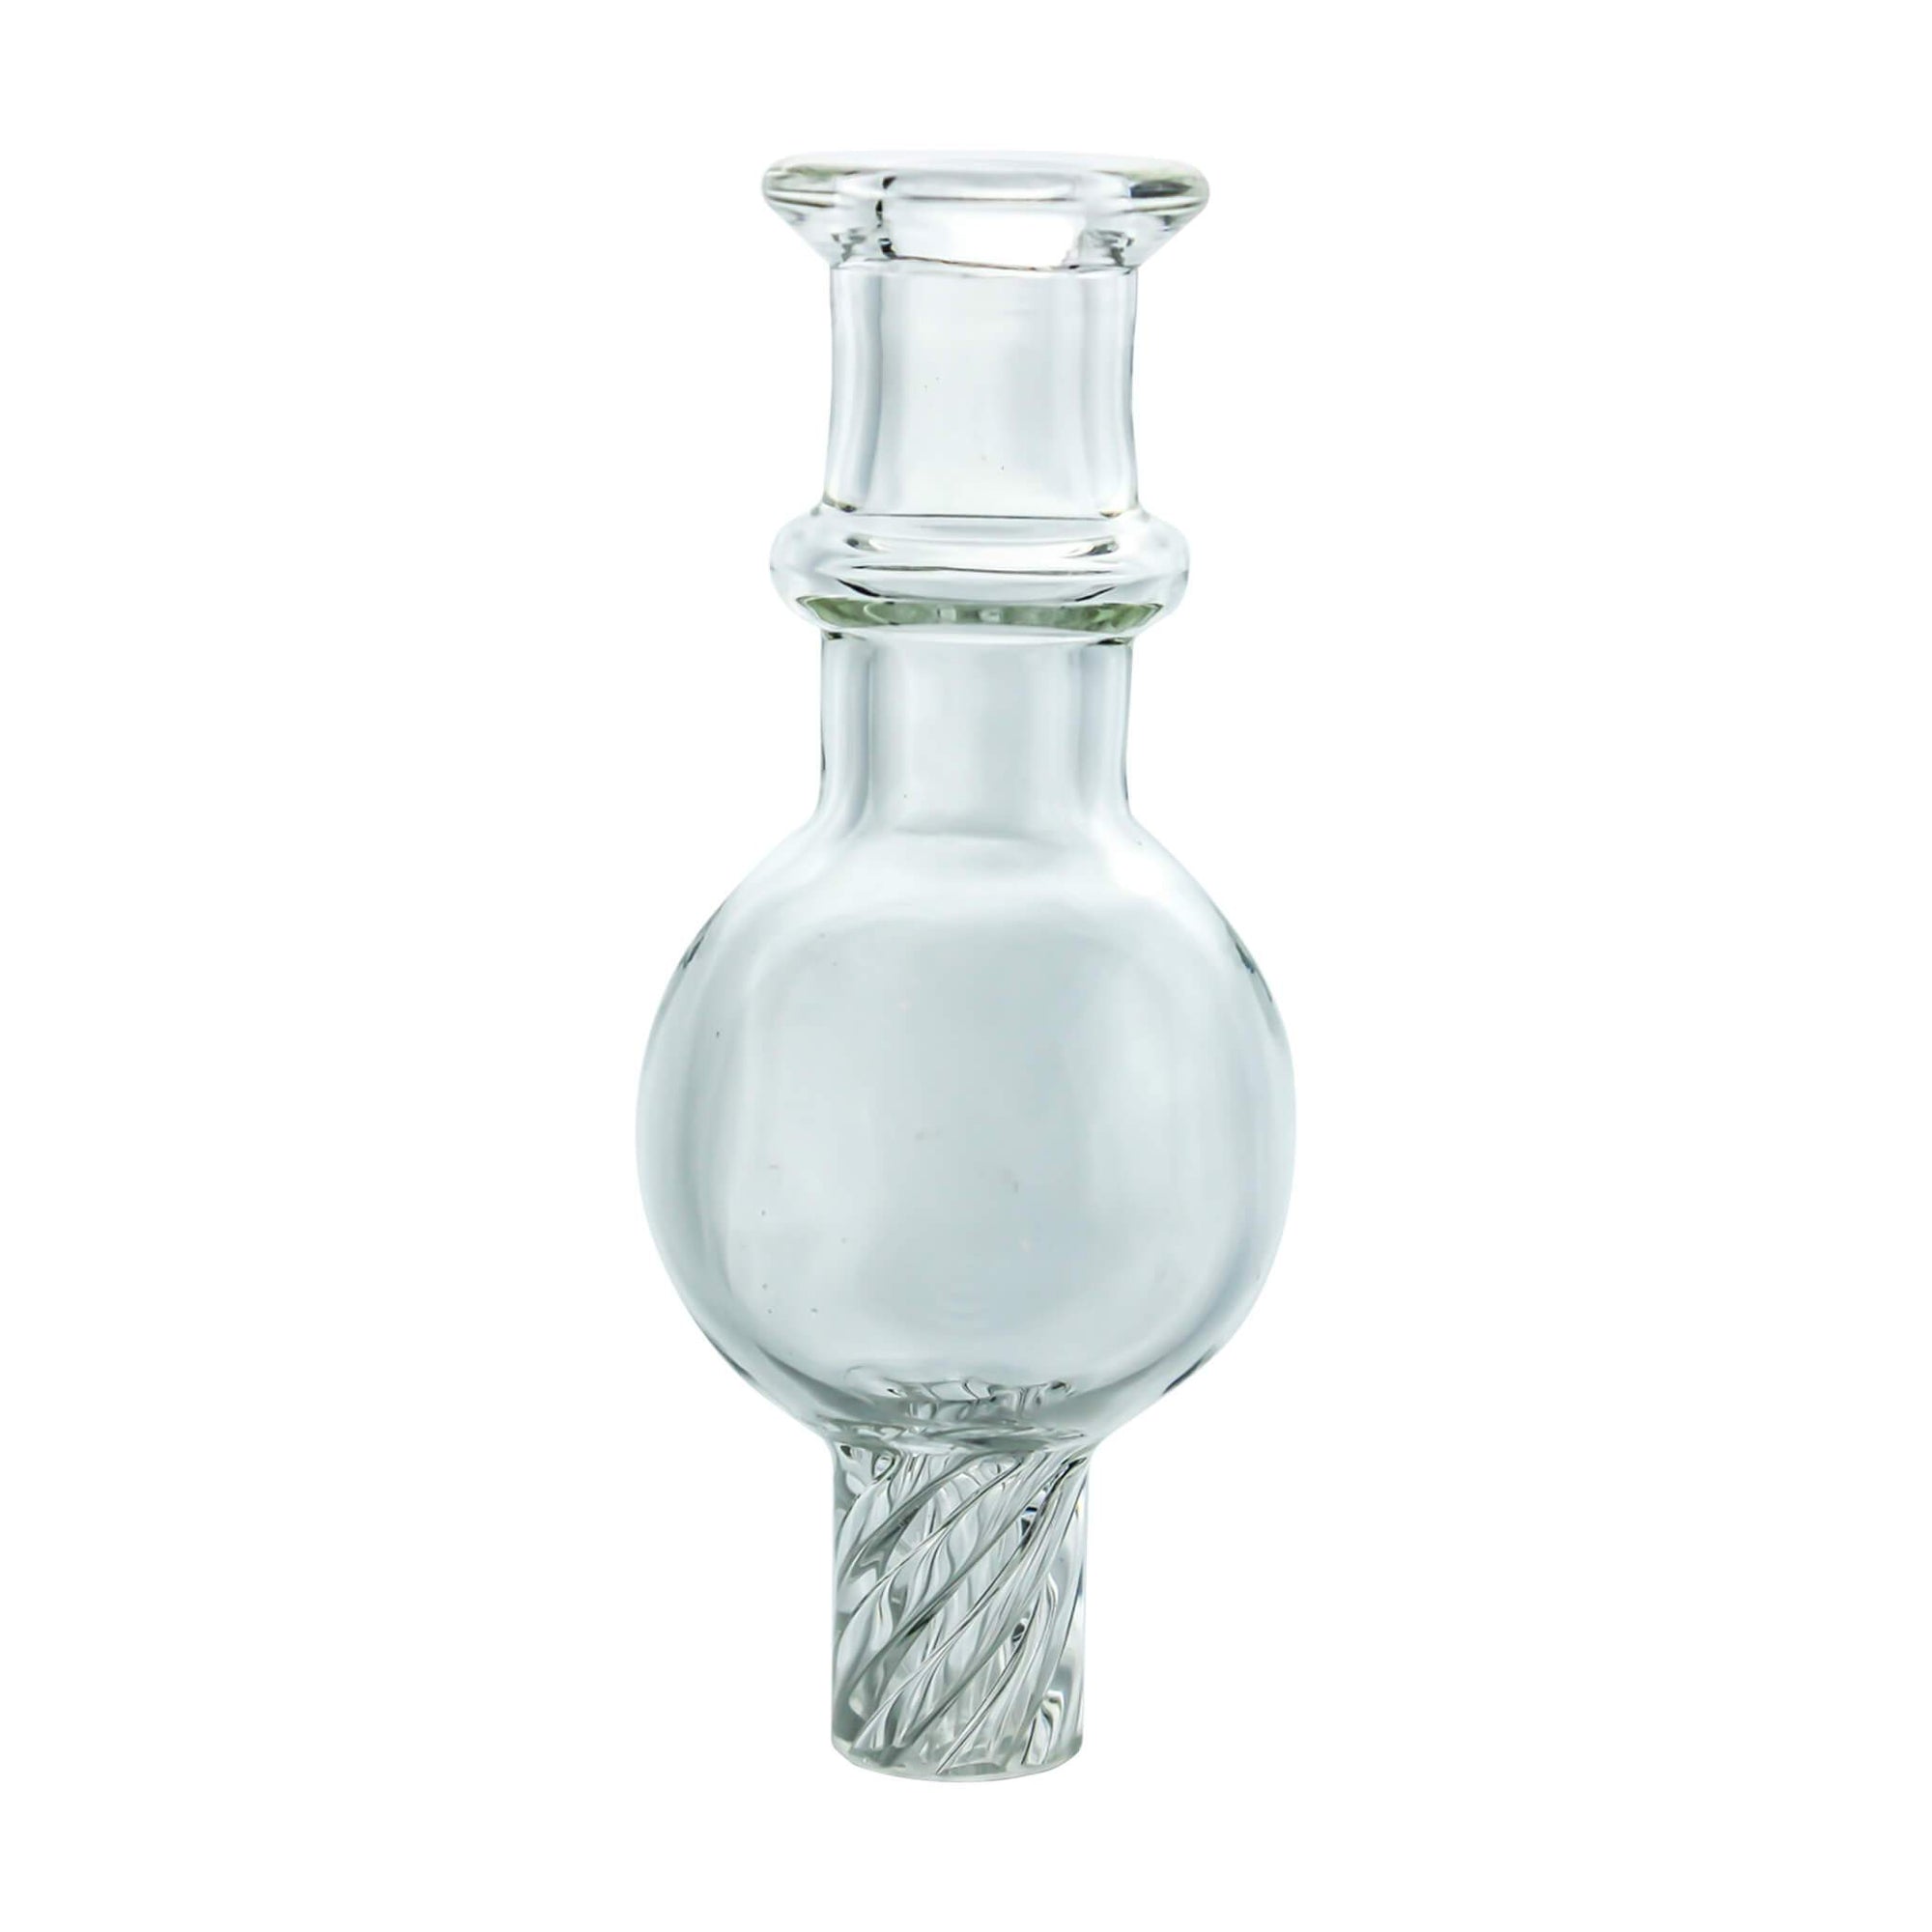 Universal Small Bubble Carb Cap | Profile View | the dabbing specialists